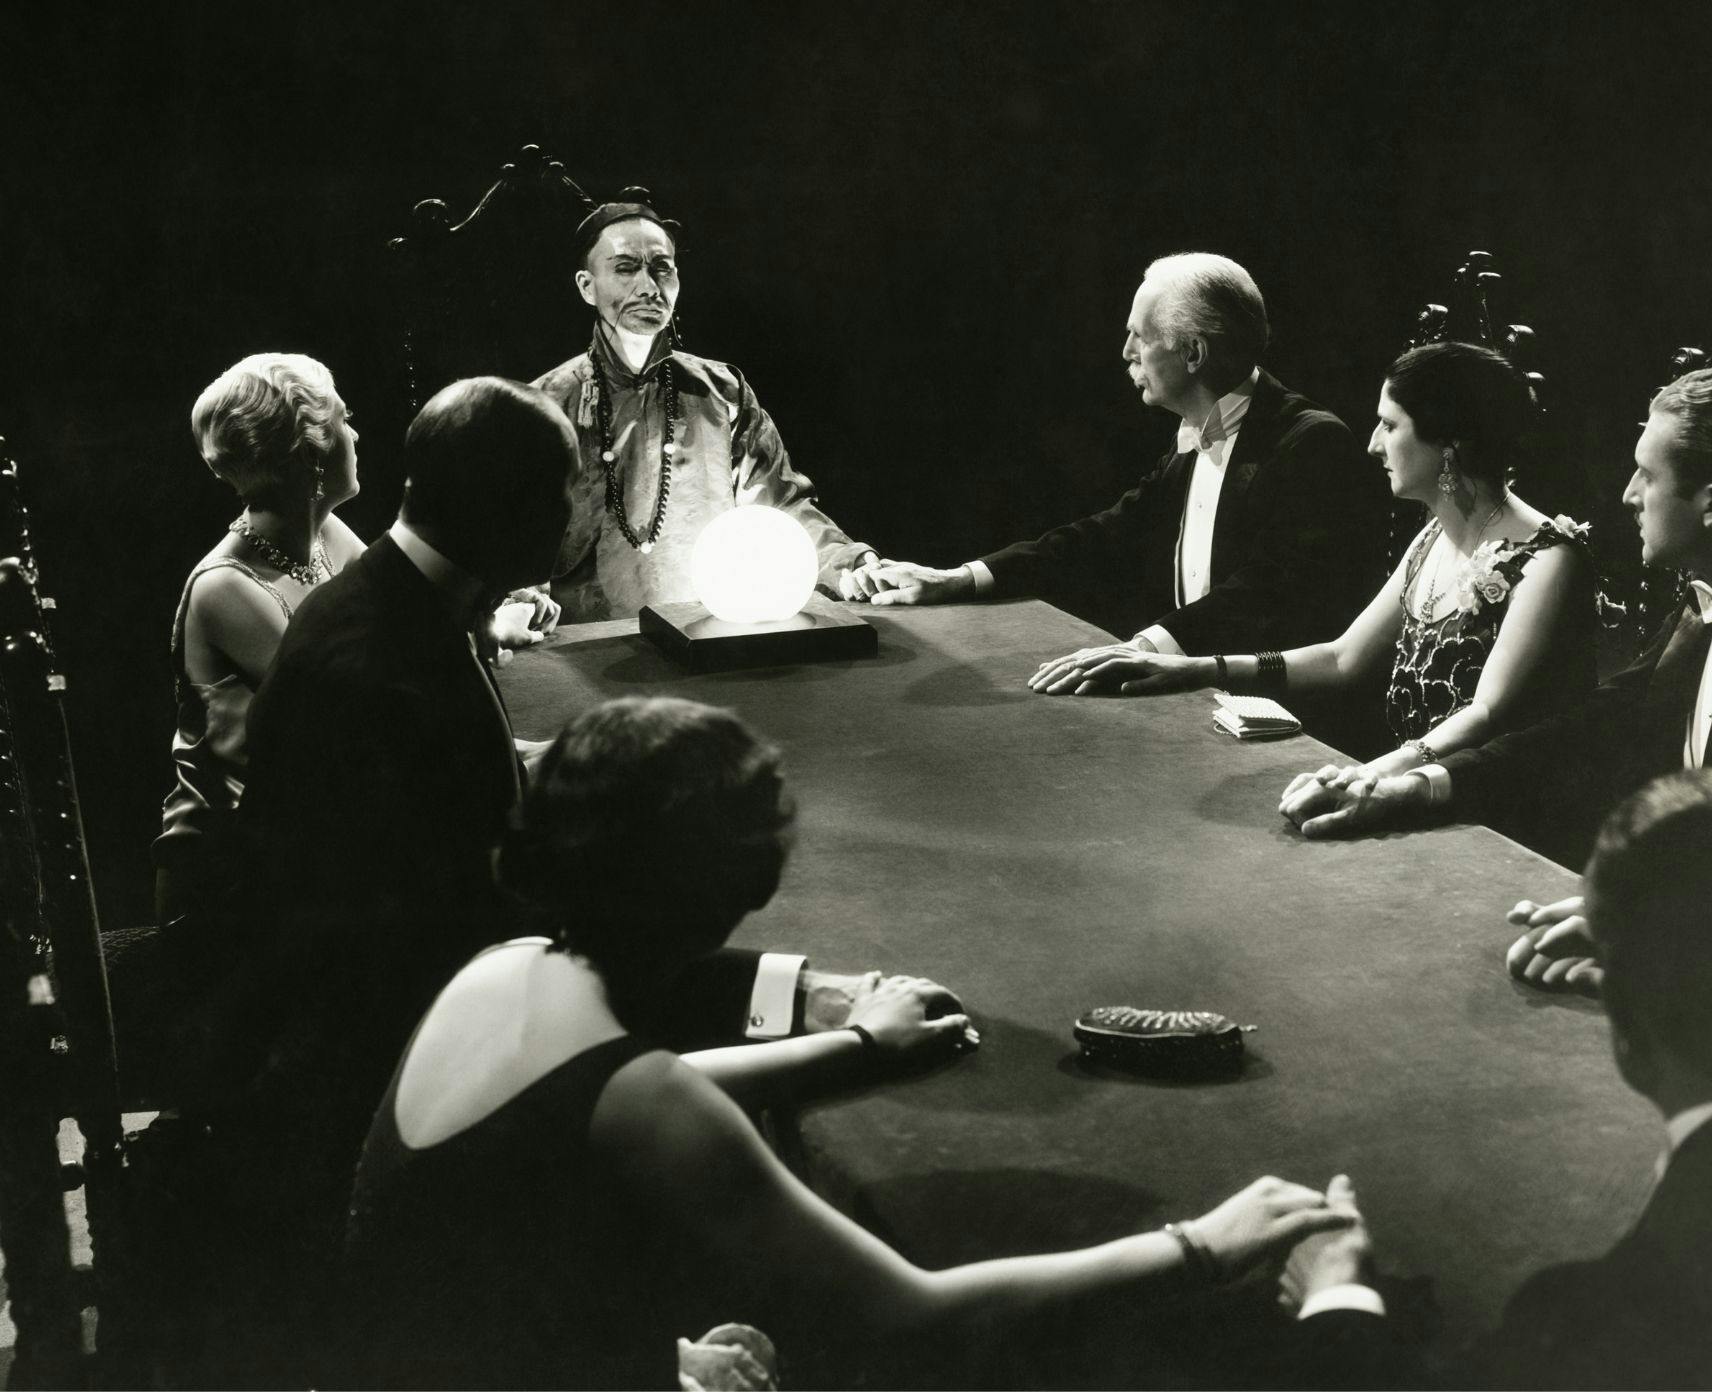 A black and white image of people sitting around a table at a seance